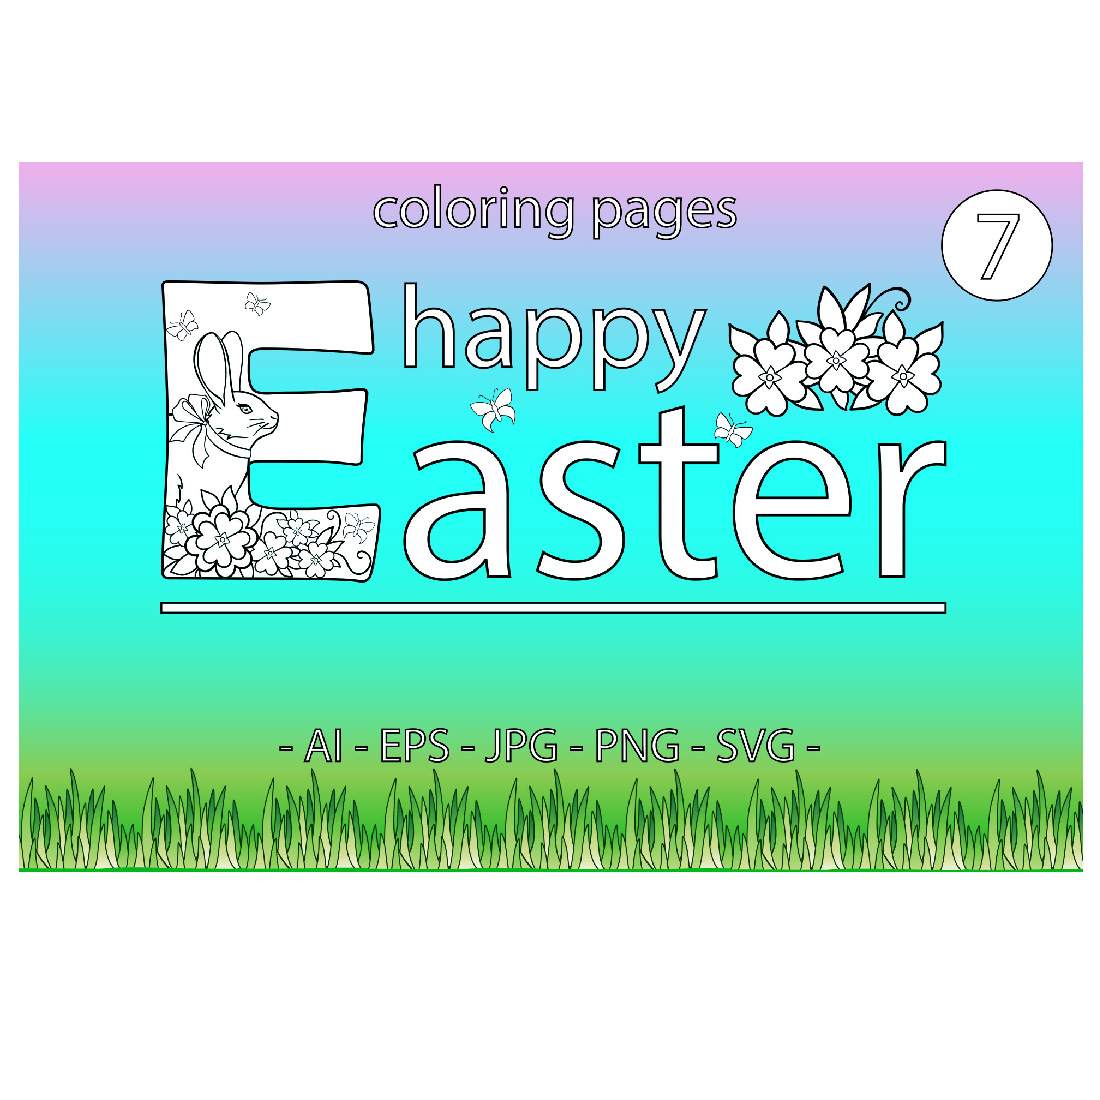 Easter Coloring Pages cover image.